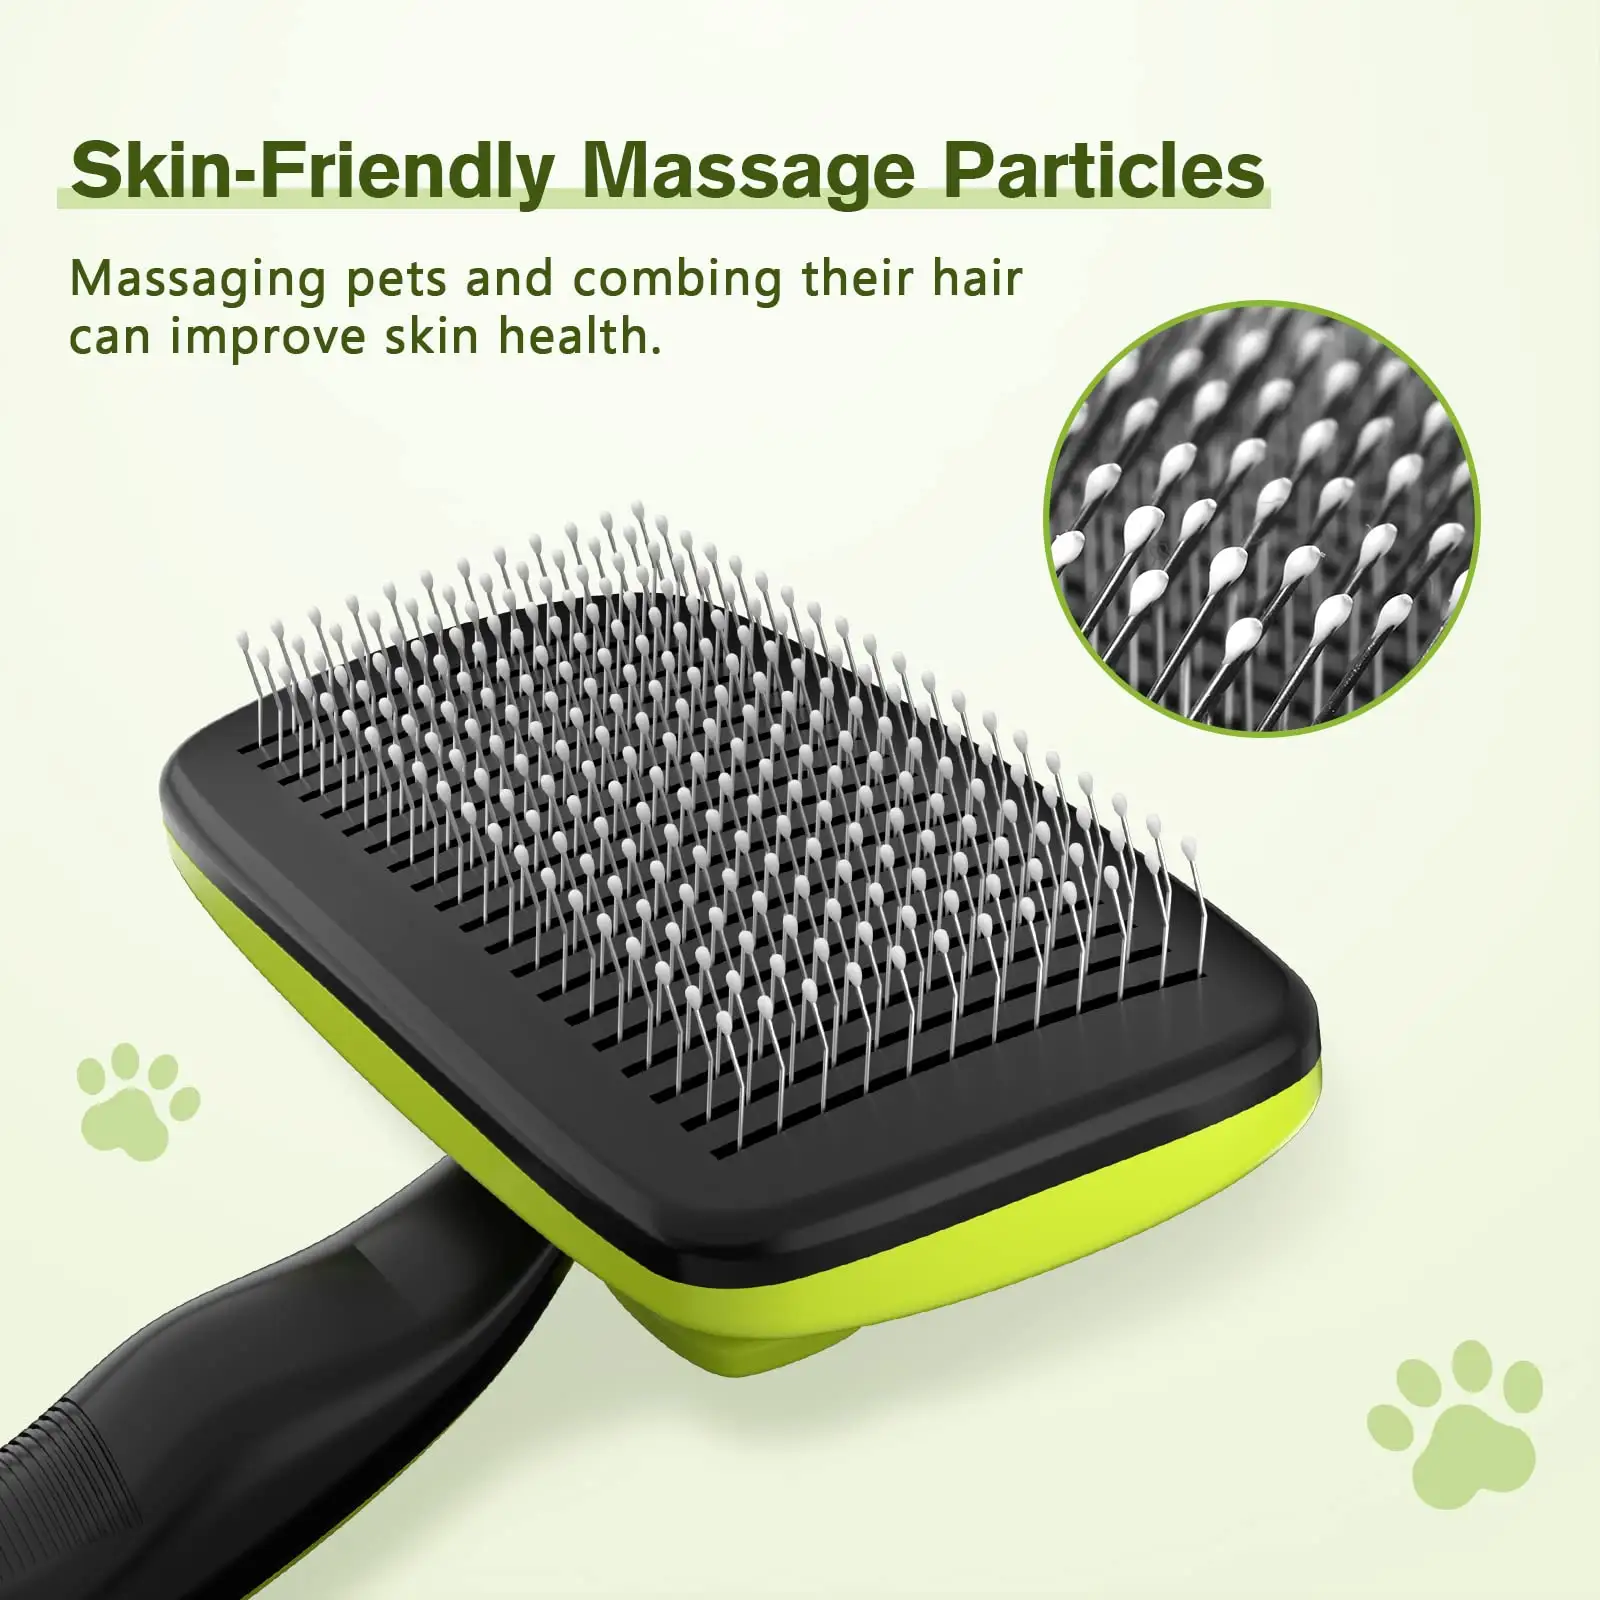 Custom Self Cleaning Stainless Steel Wires Pet Hair Grooming Tool Dogs And Cats Shedding Slicker Brush